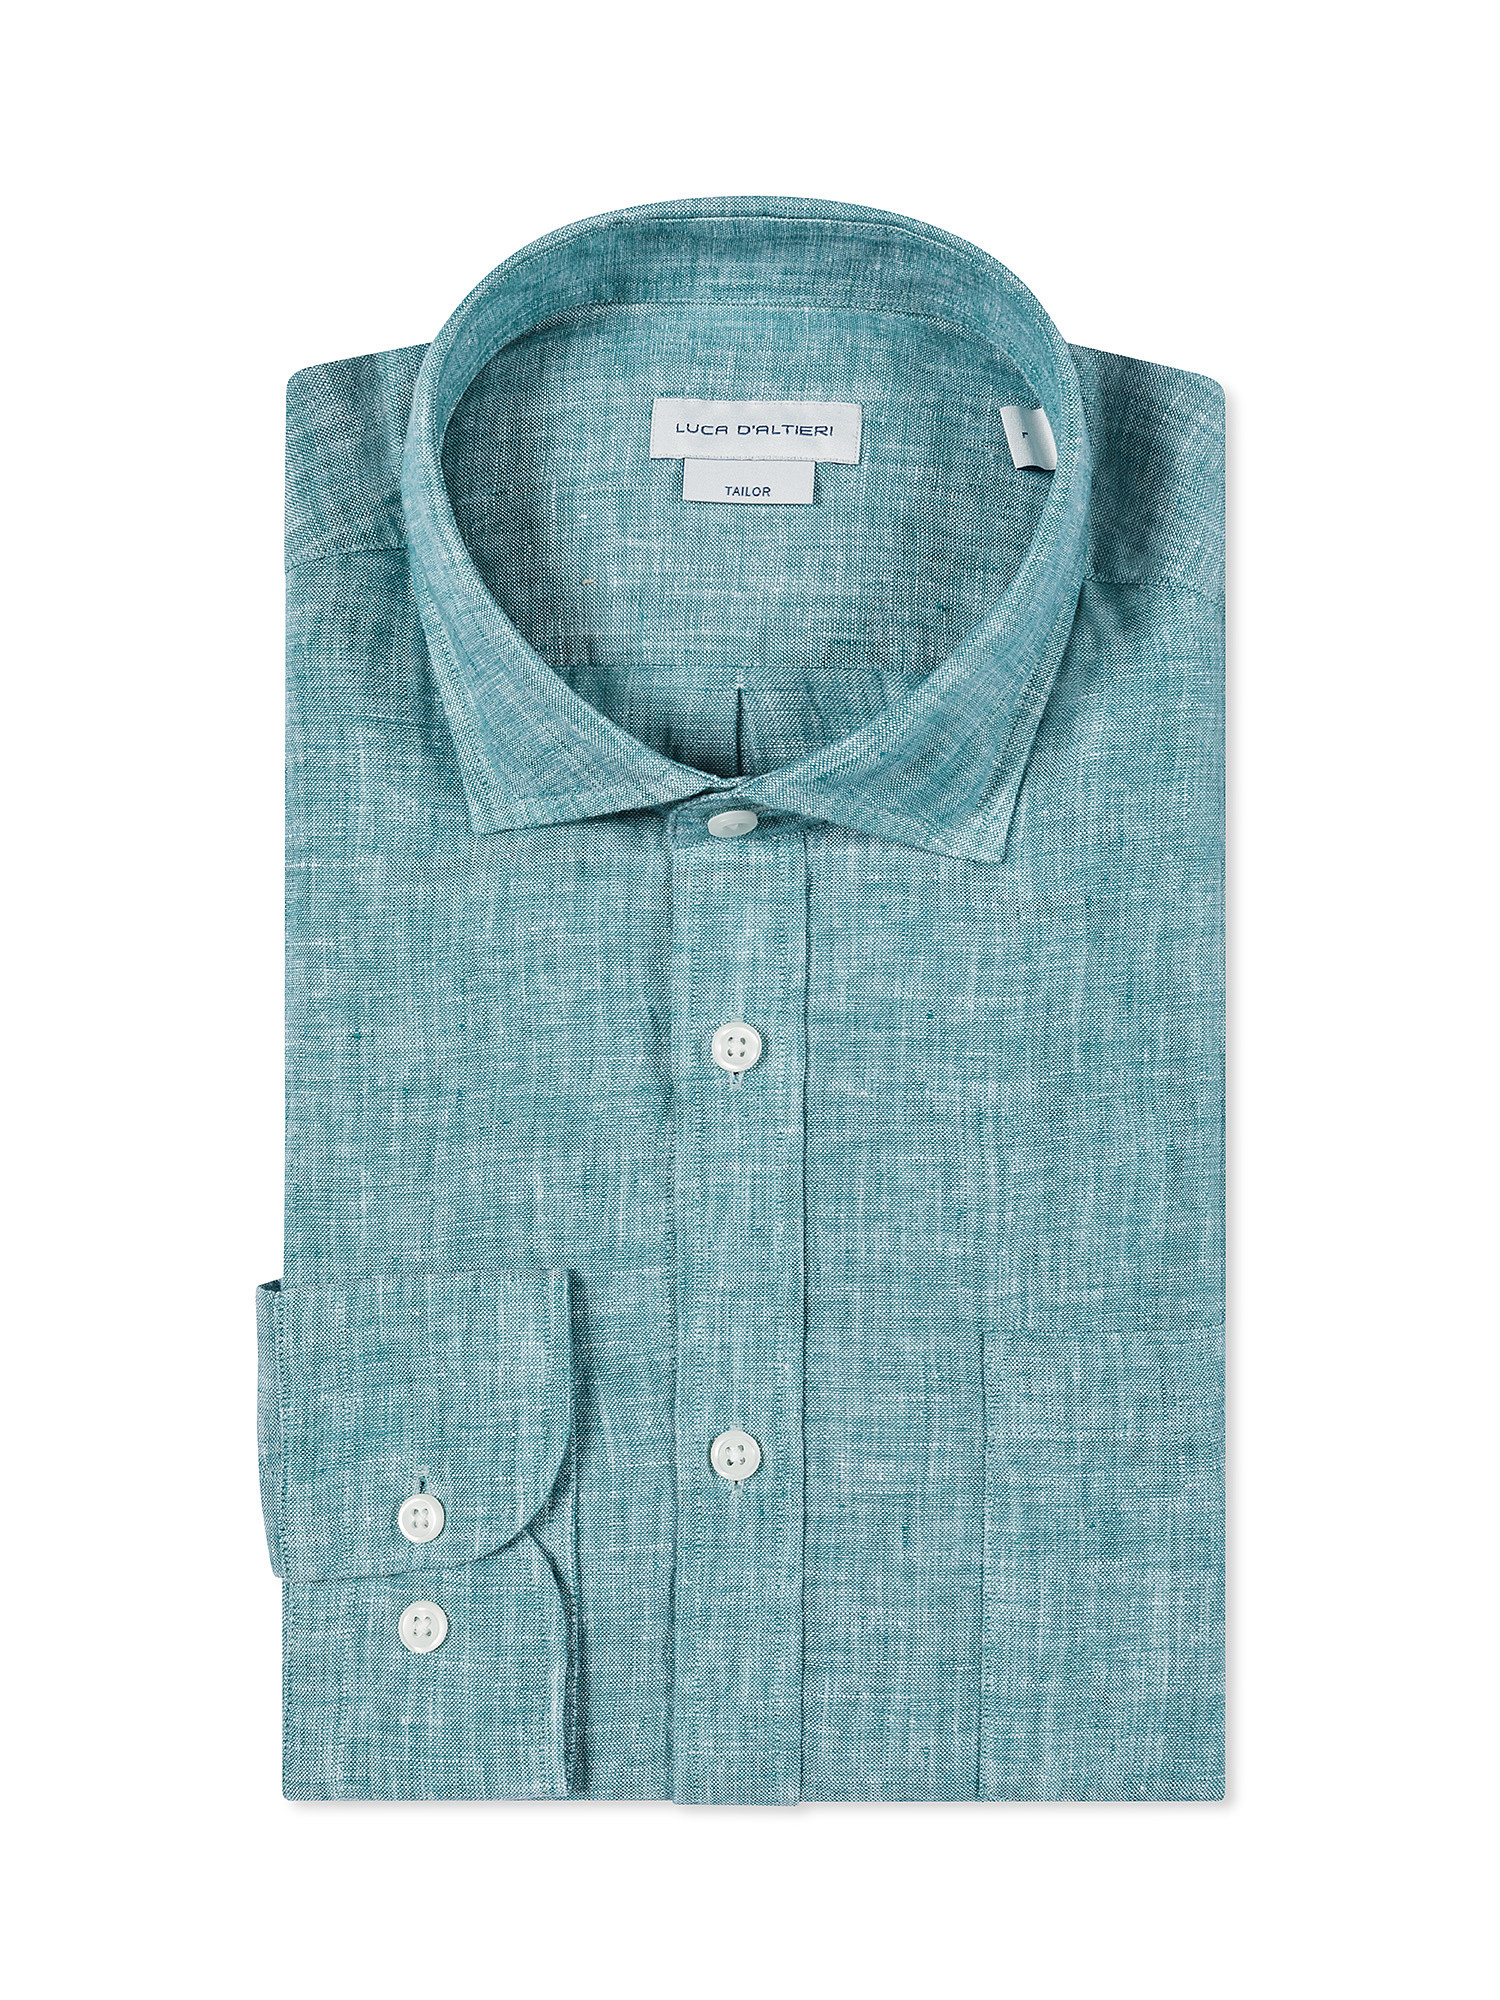 Luca D'Altieri - Tailor fit shirt in pure linen, Emerald, large image number 2